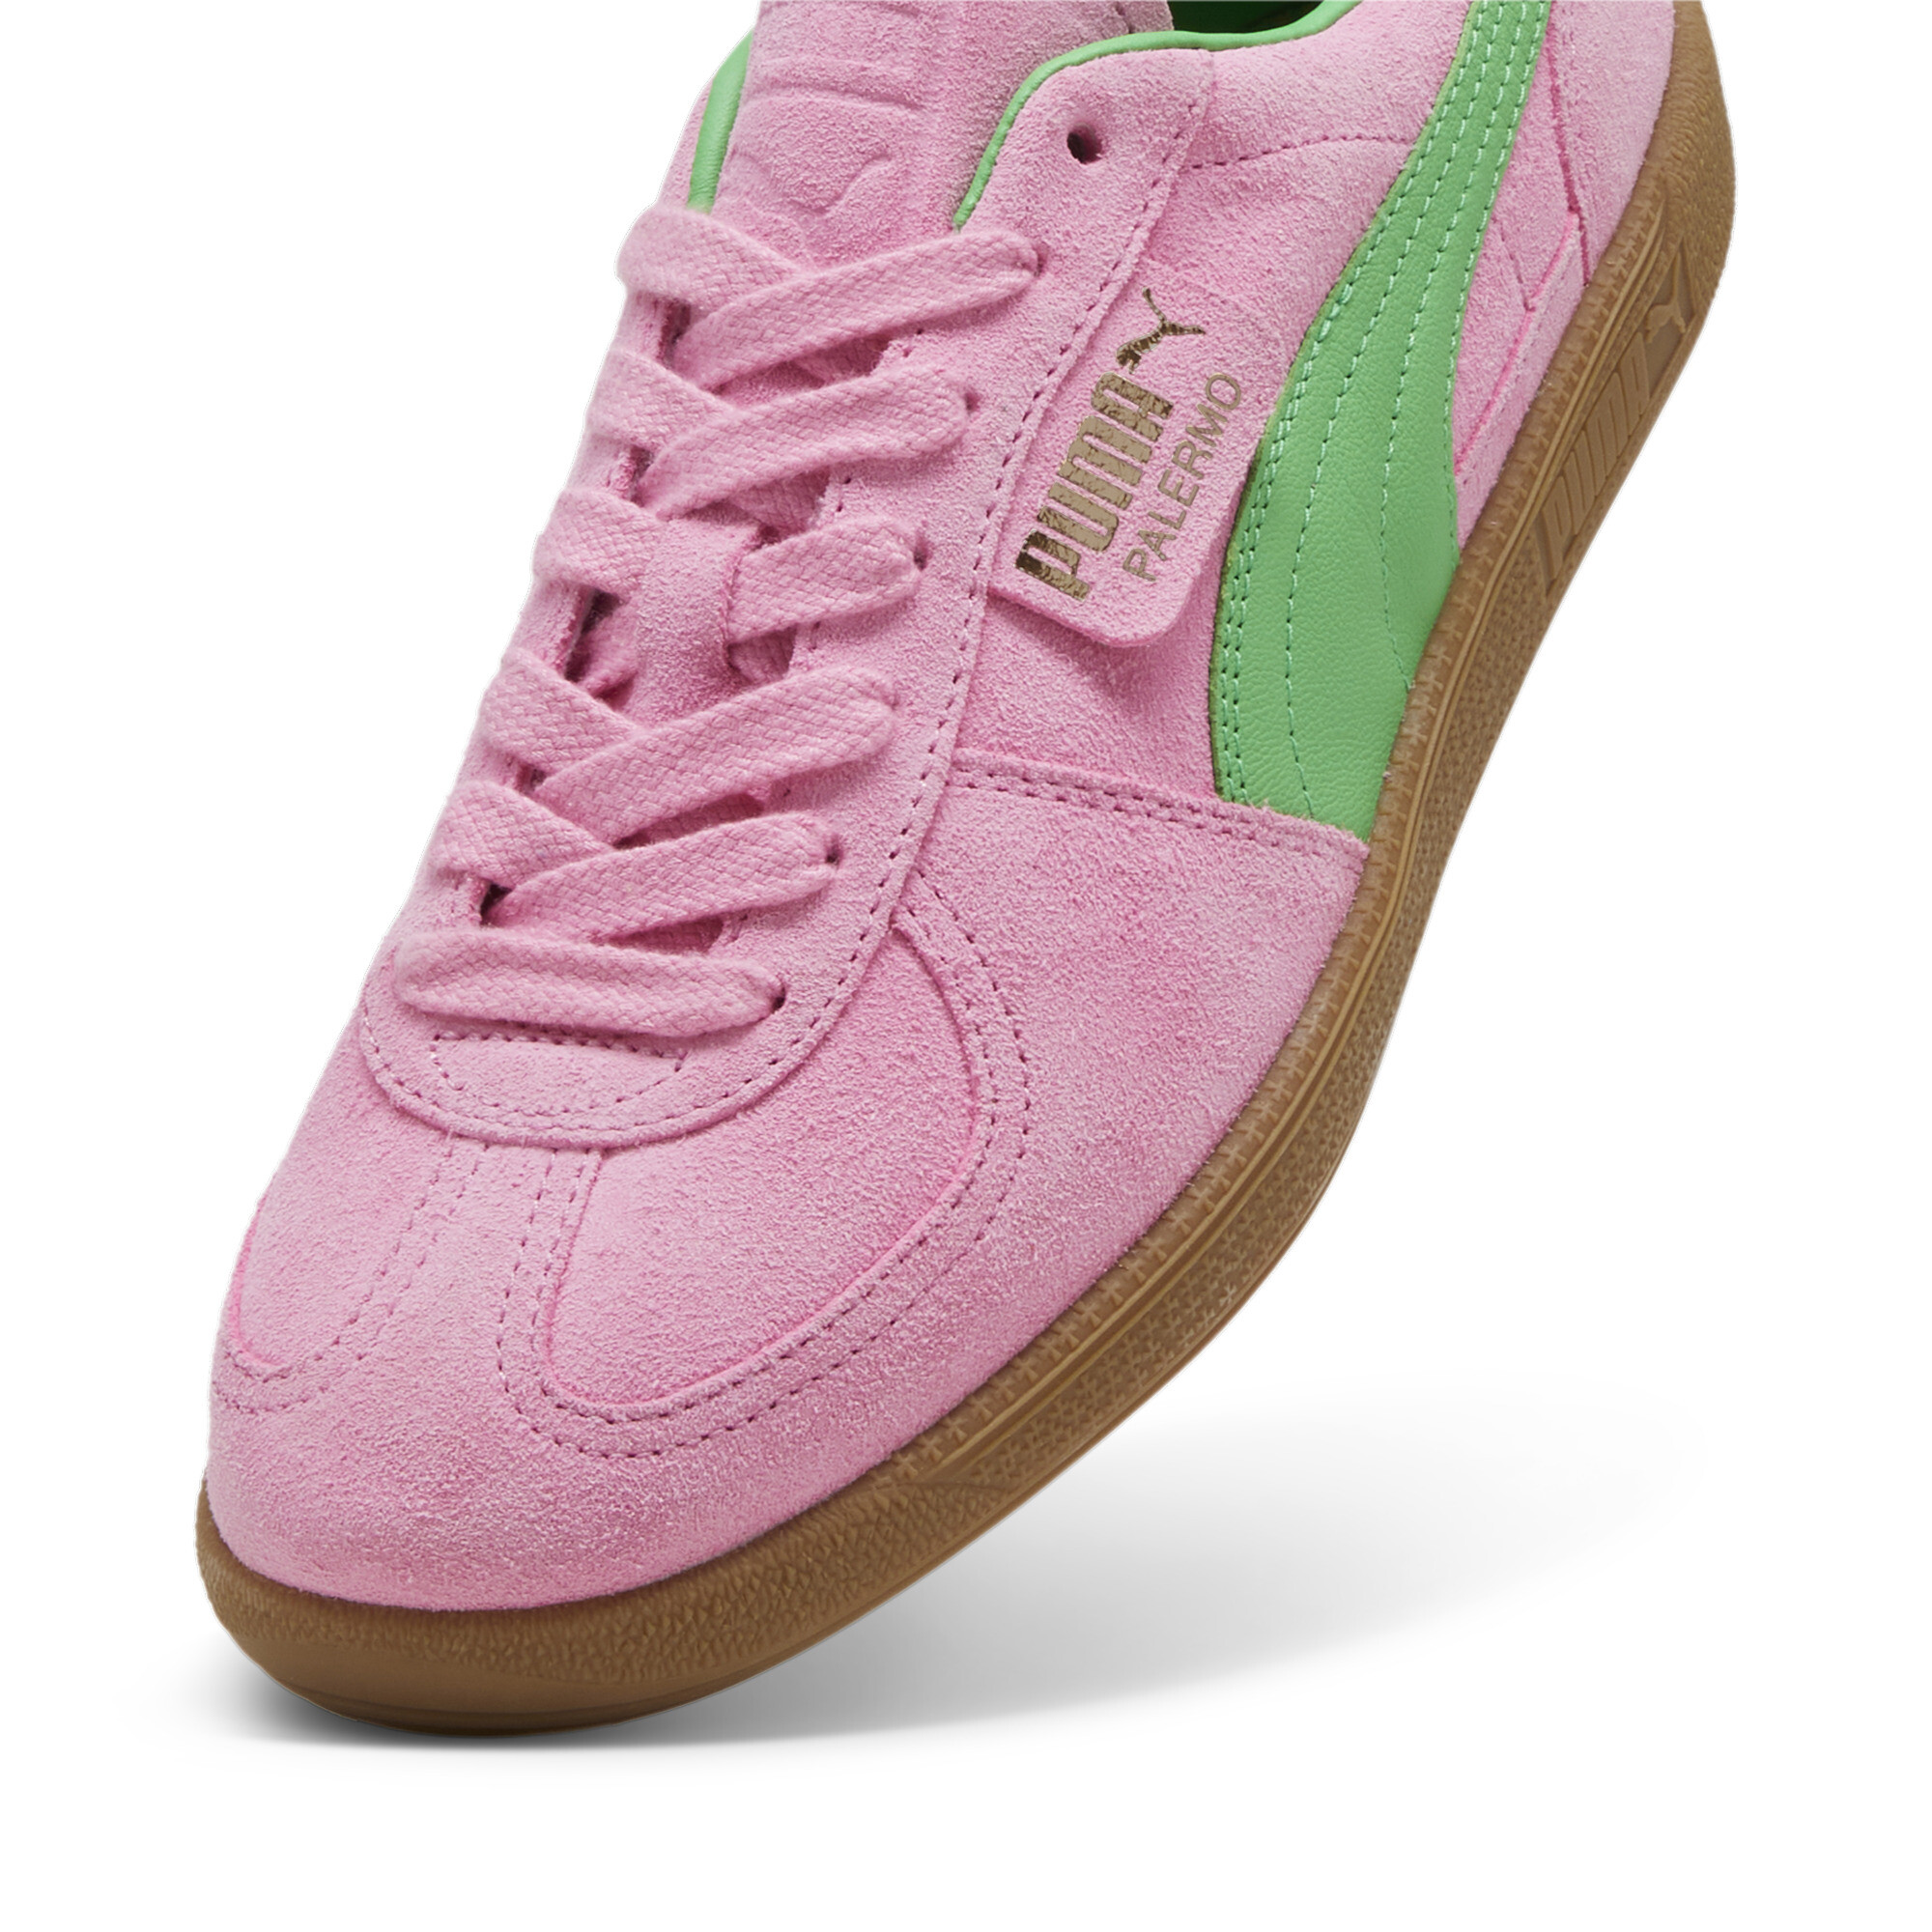 Men's PUMA Palermo Special Shoes In Pink, Size EU 45